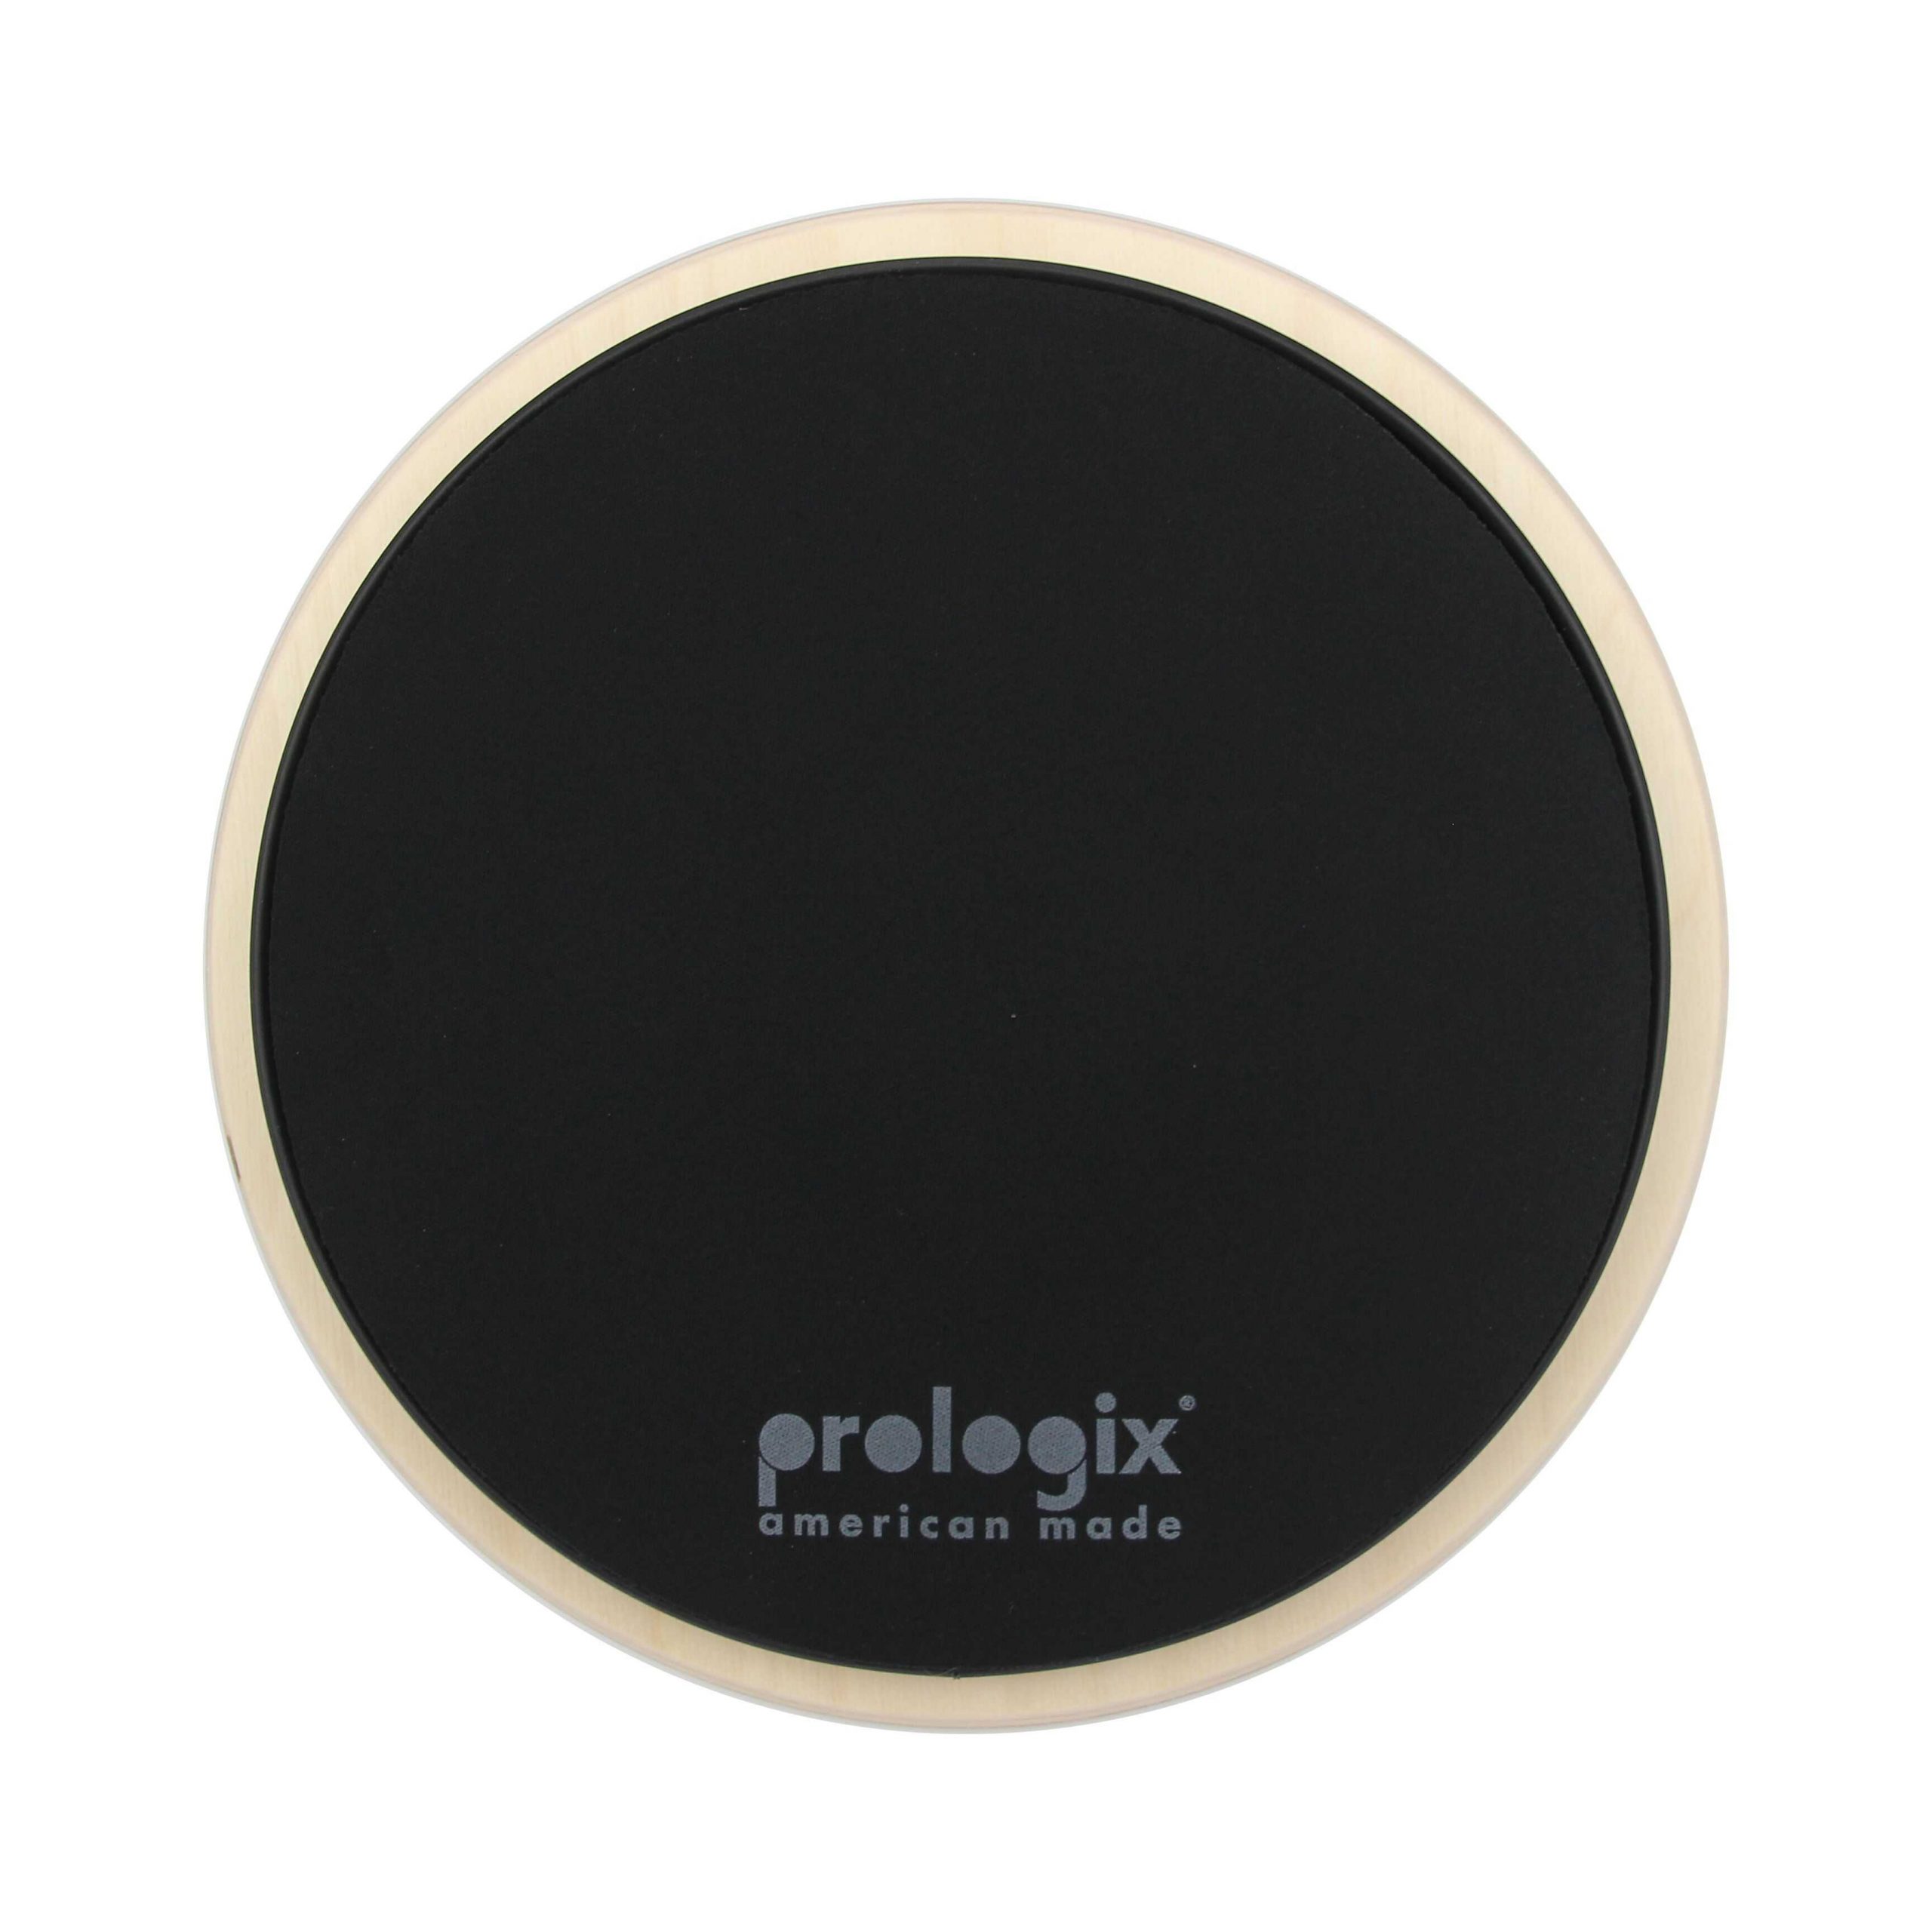 Prologix Black Out Pad 10" with Rim Extreme Resistance